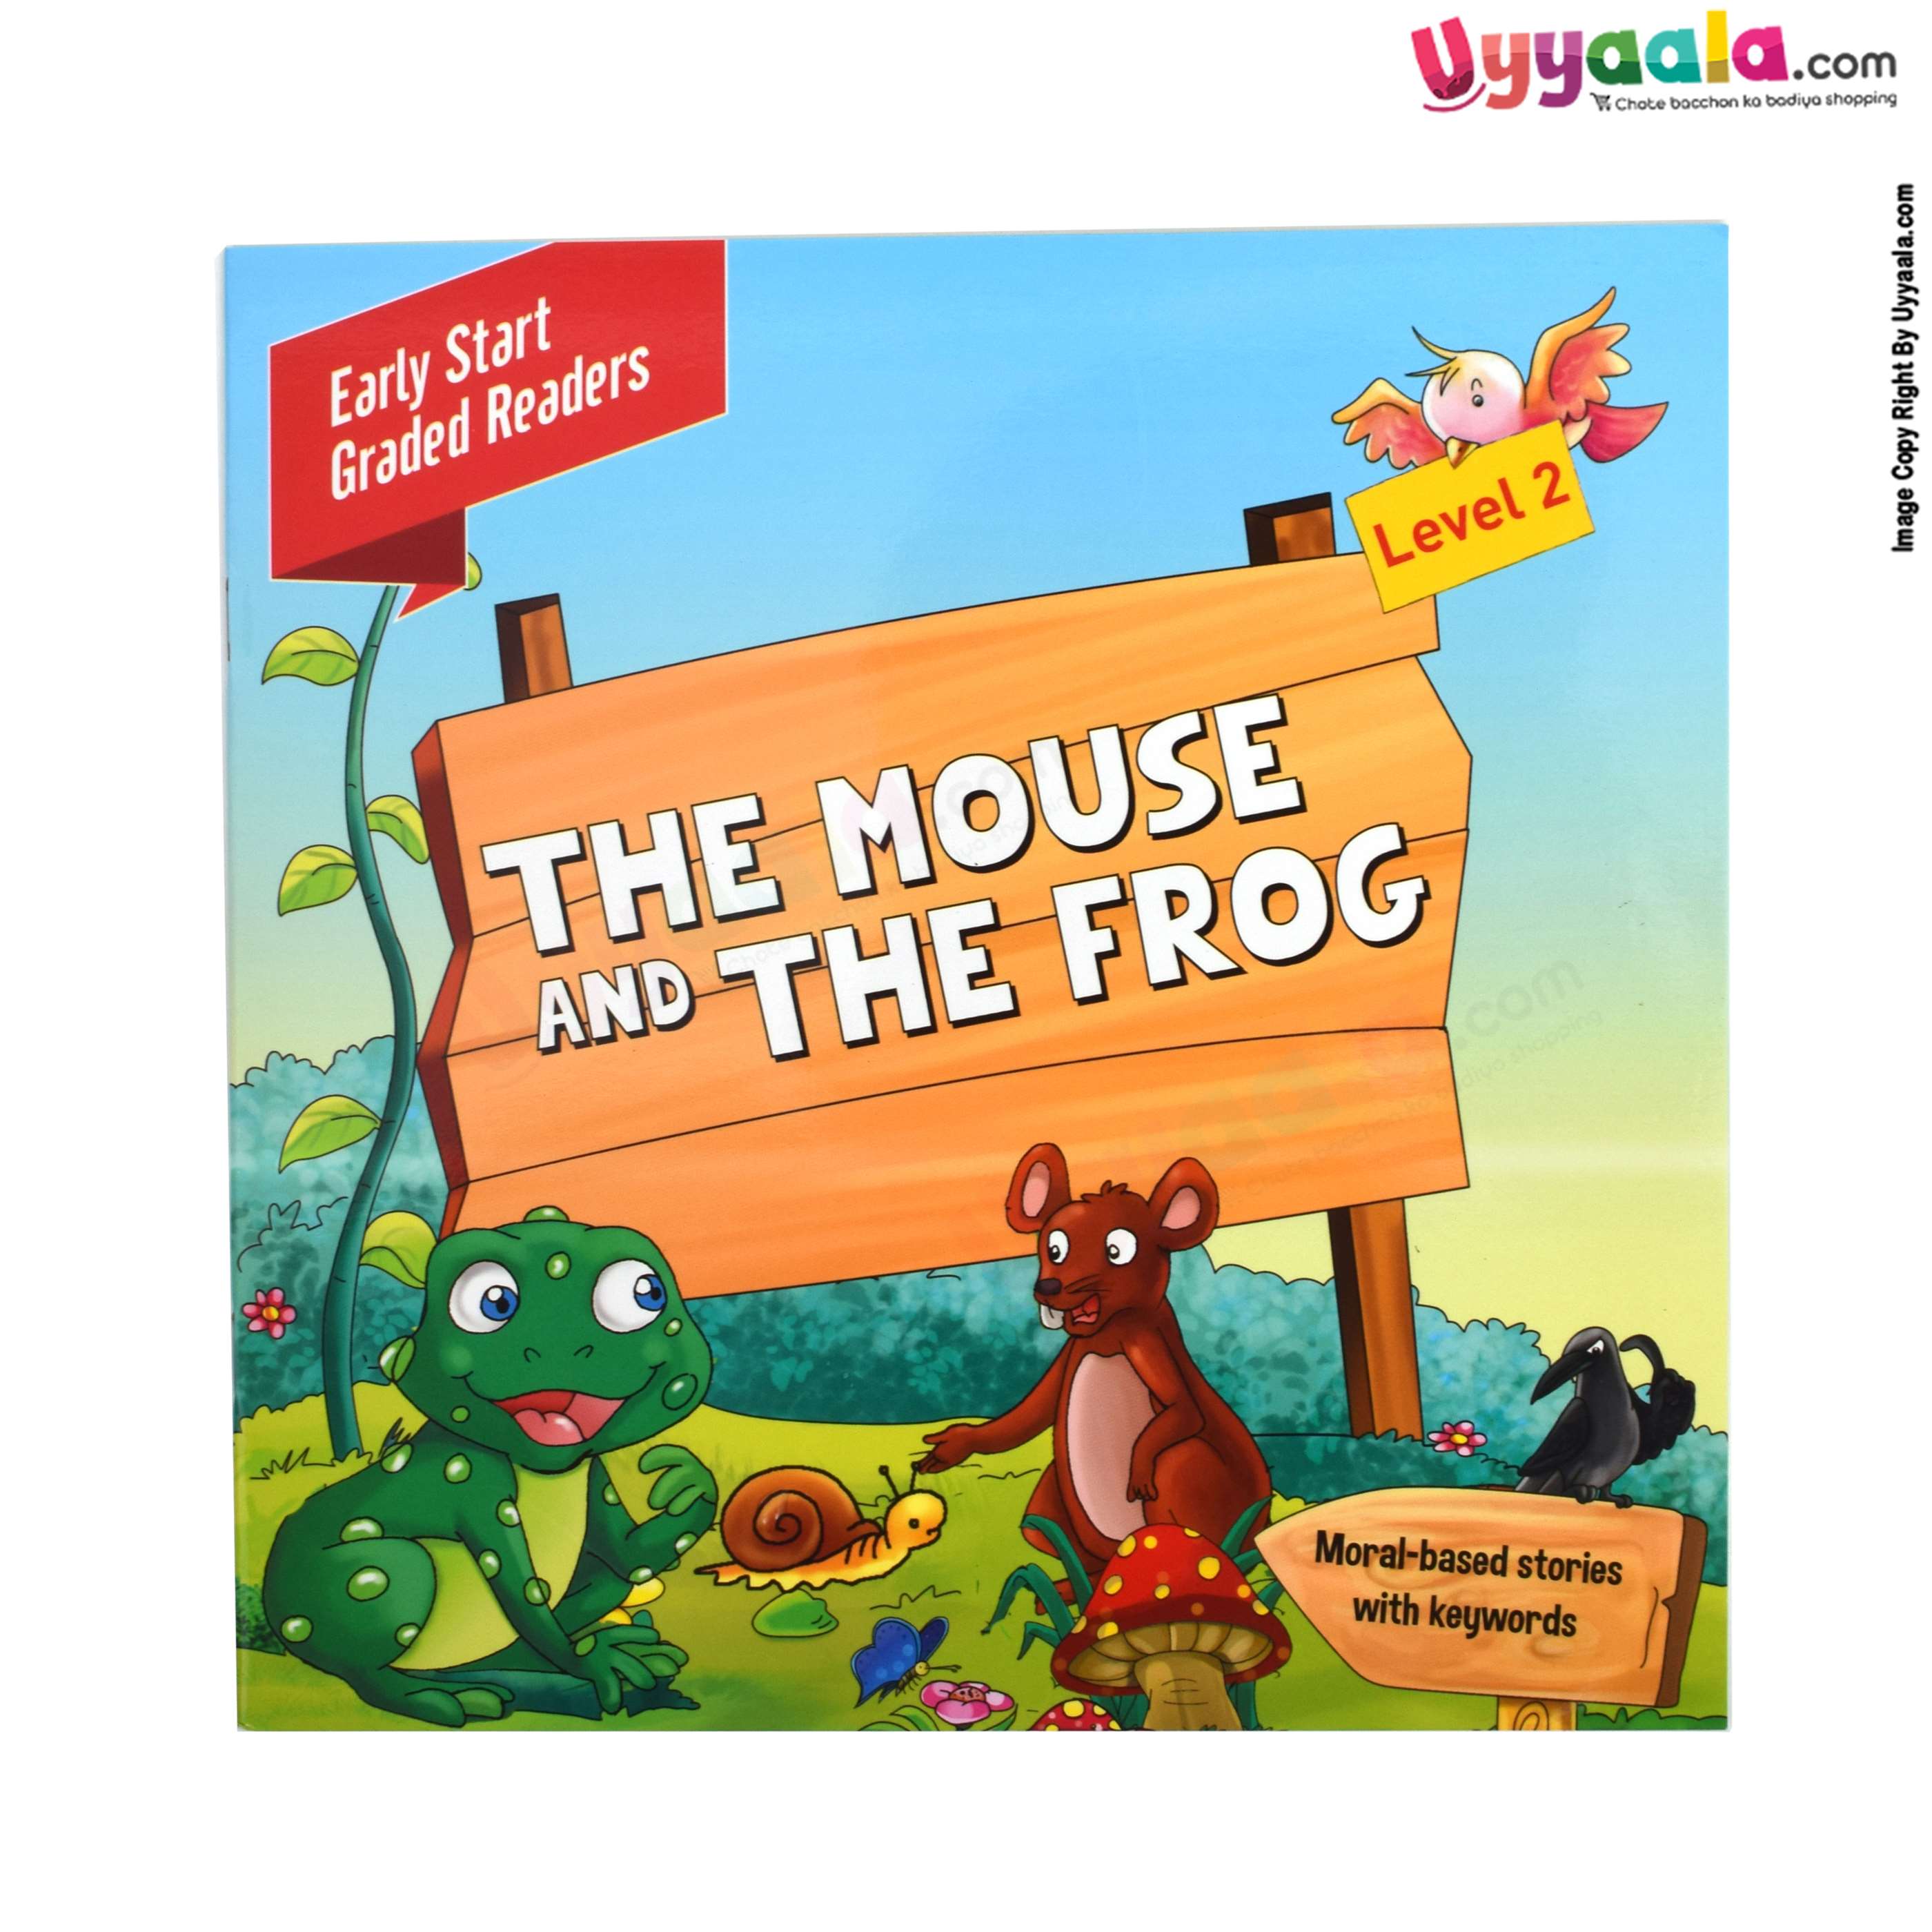 Early start graded readers - moral based stories, the mouse and the frog, level - 2 (2 - 5 years)